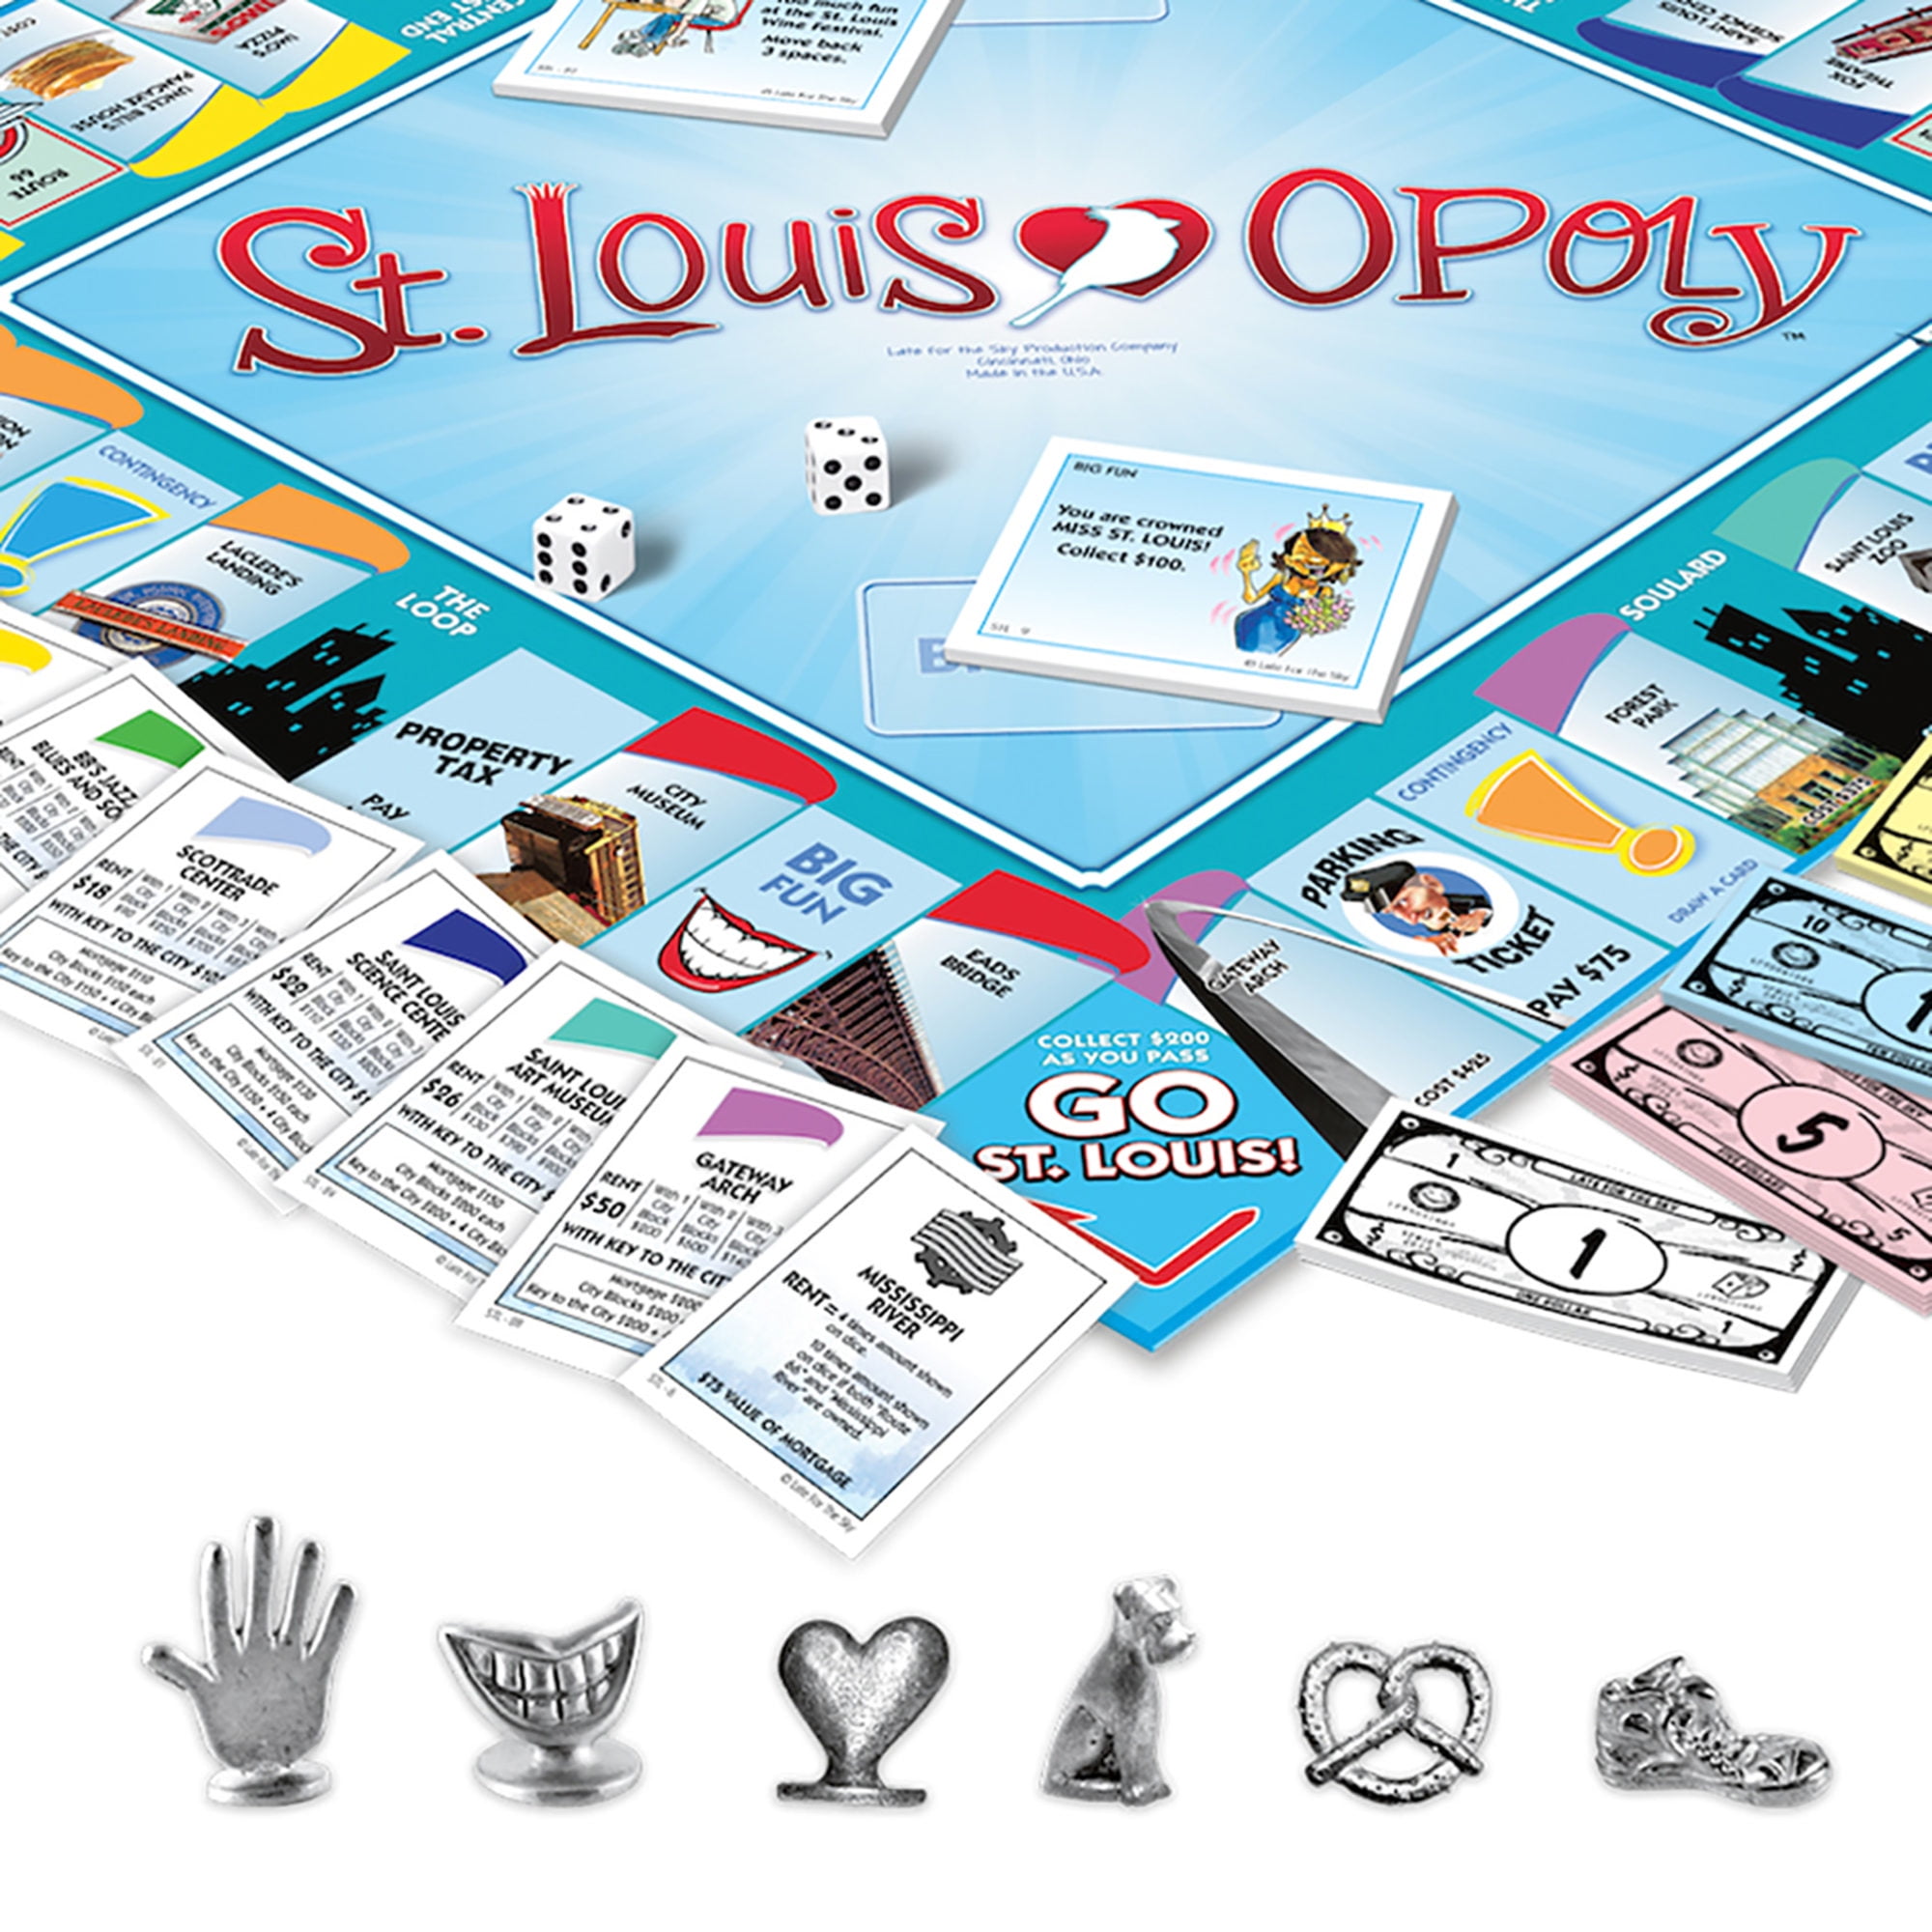 ST. LOUIS IN A BOX | Monopoly-Style Board Game based on the Great City